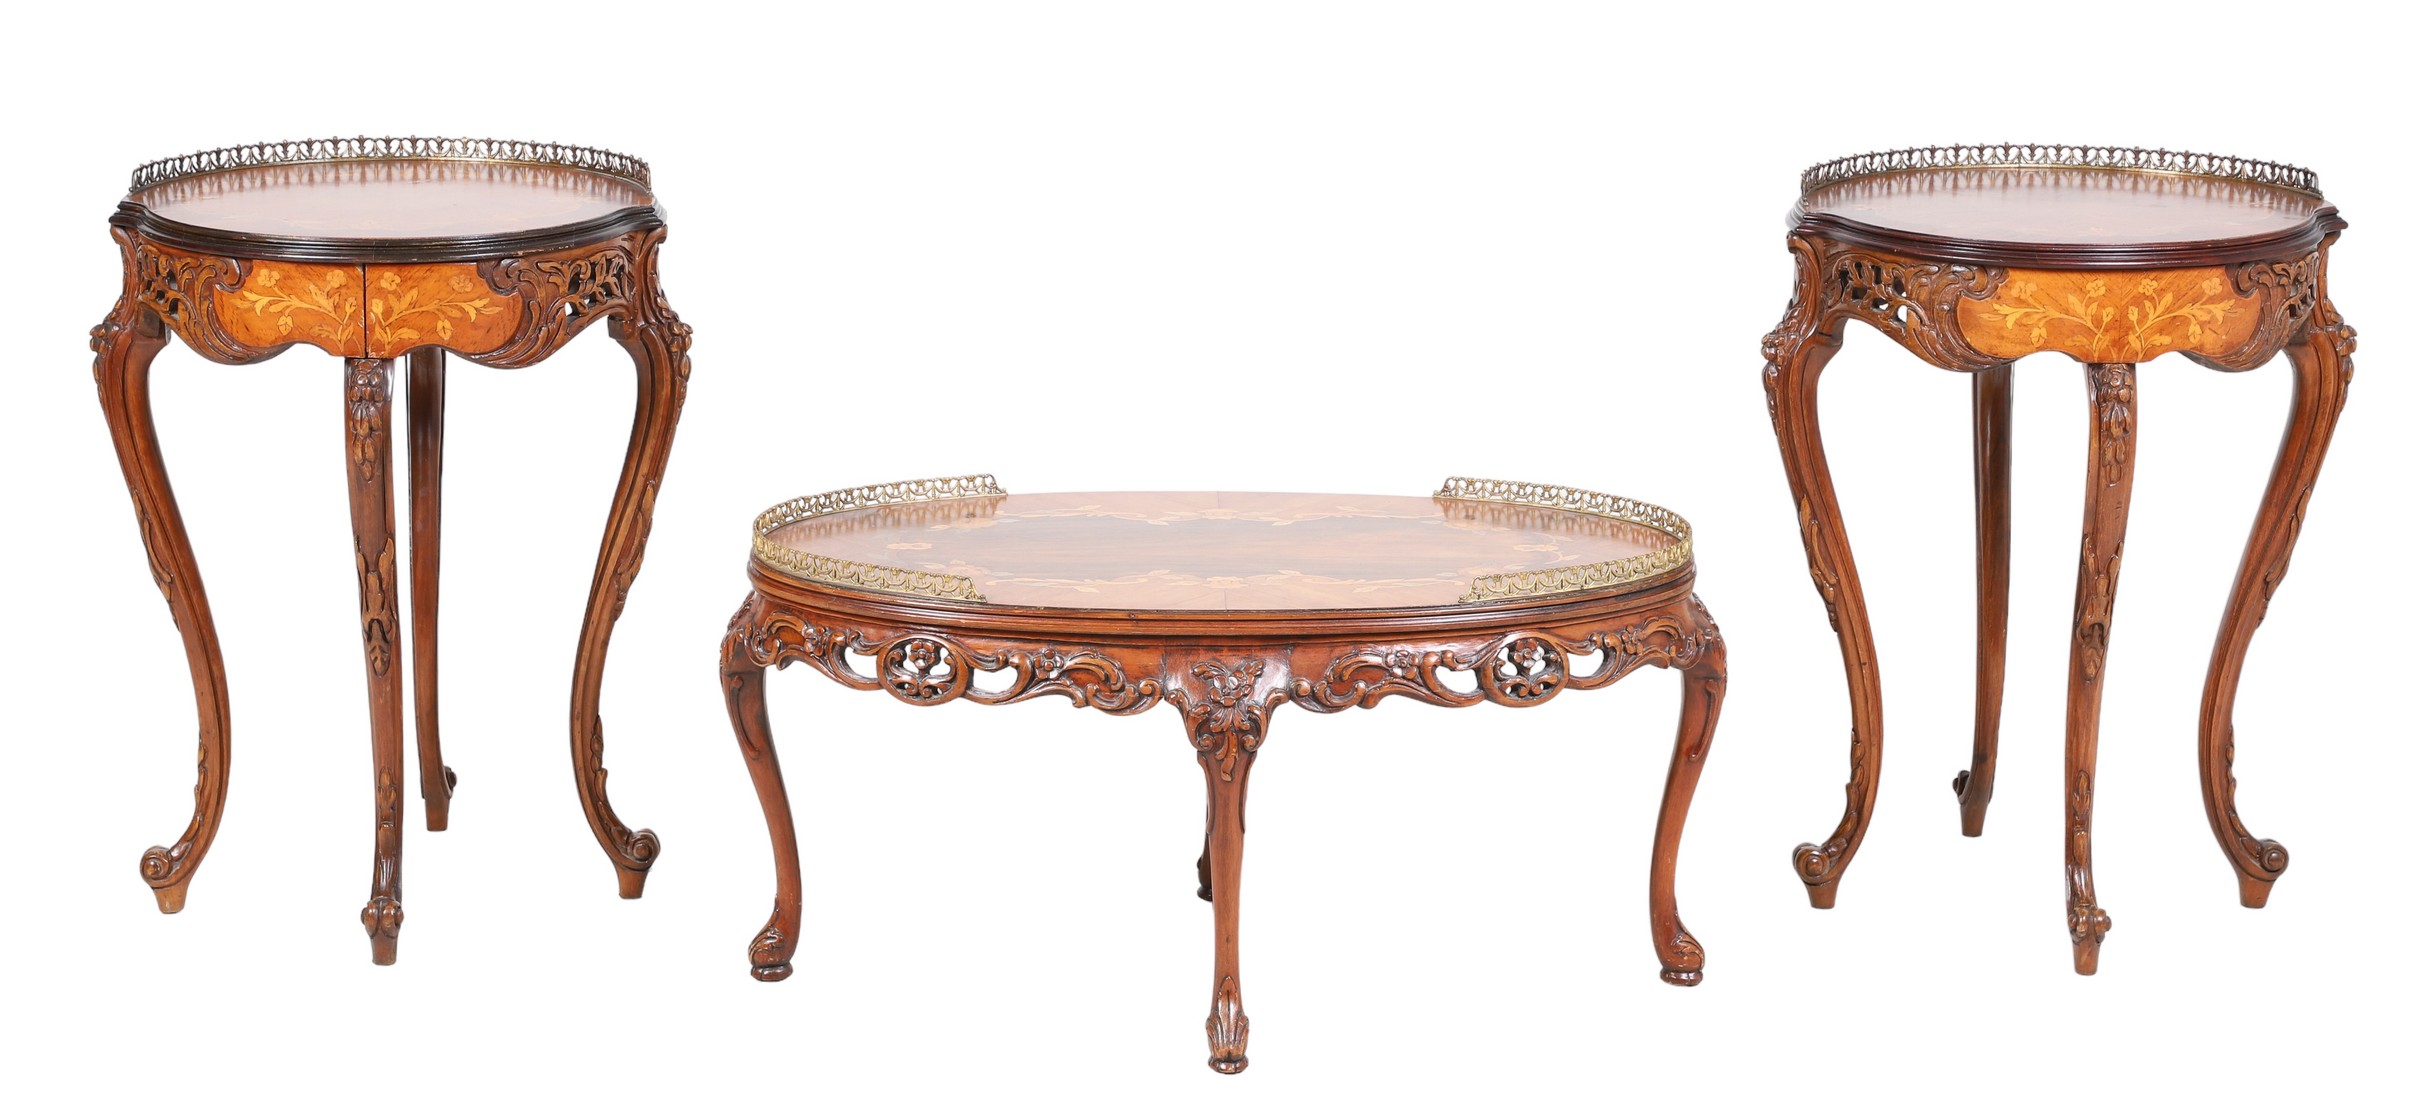 (3) pc Louis XV style inlaid table